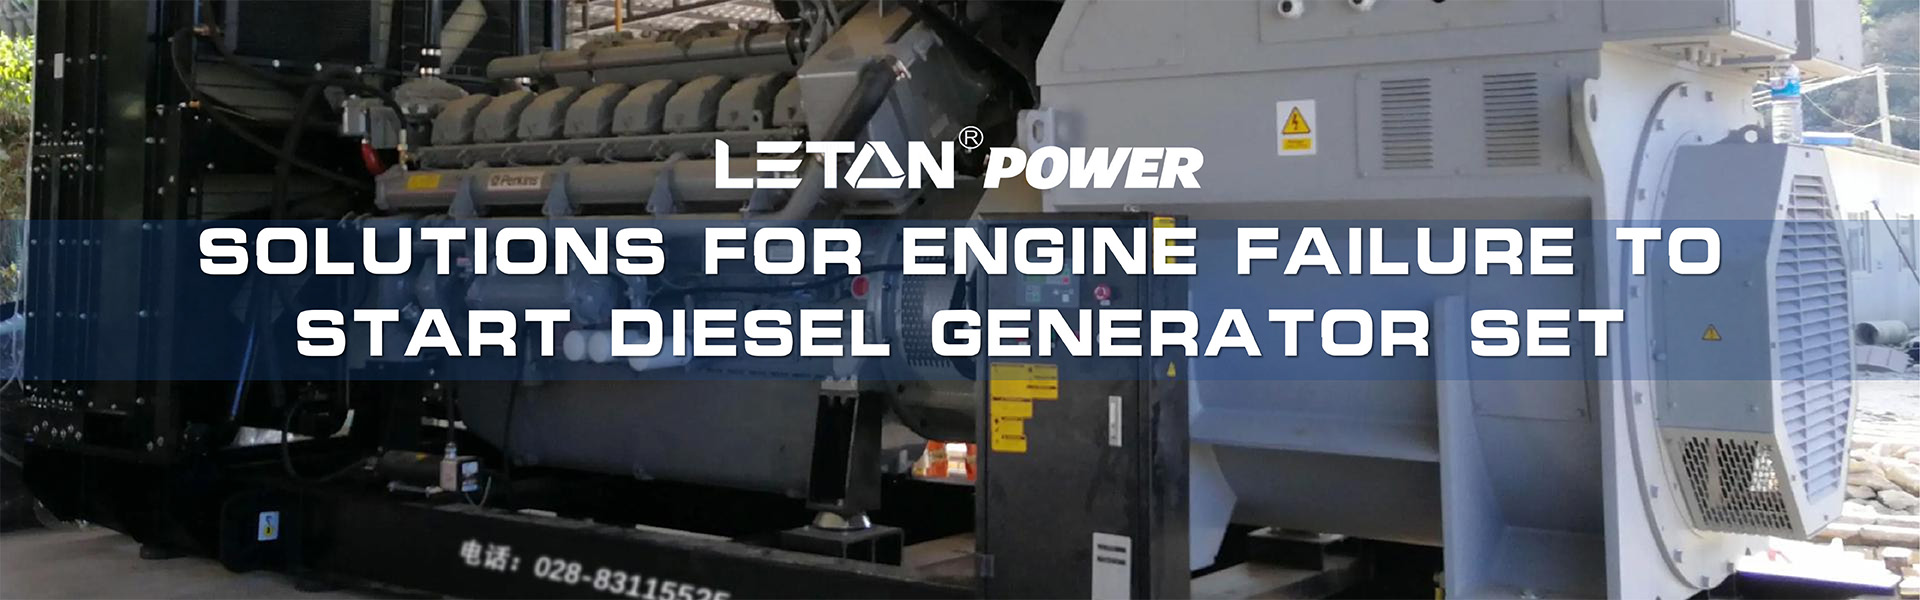 Analysis and Solutions for Engine Failure to Start Diesel Generator Set